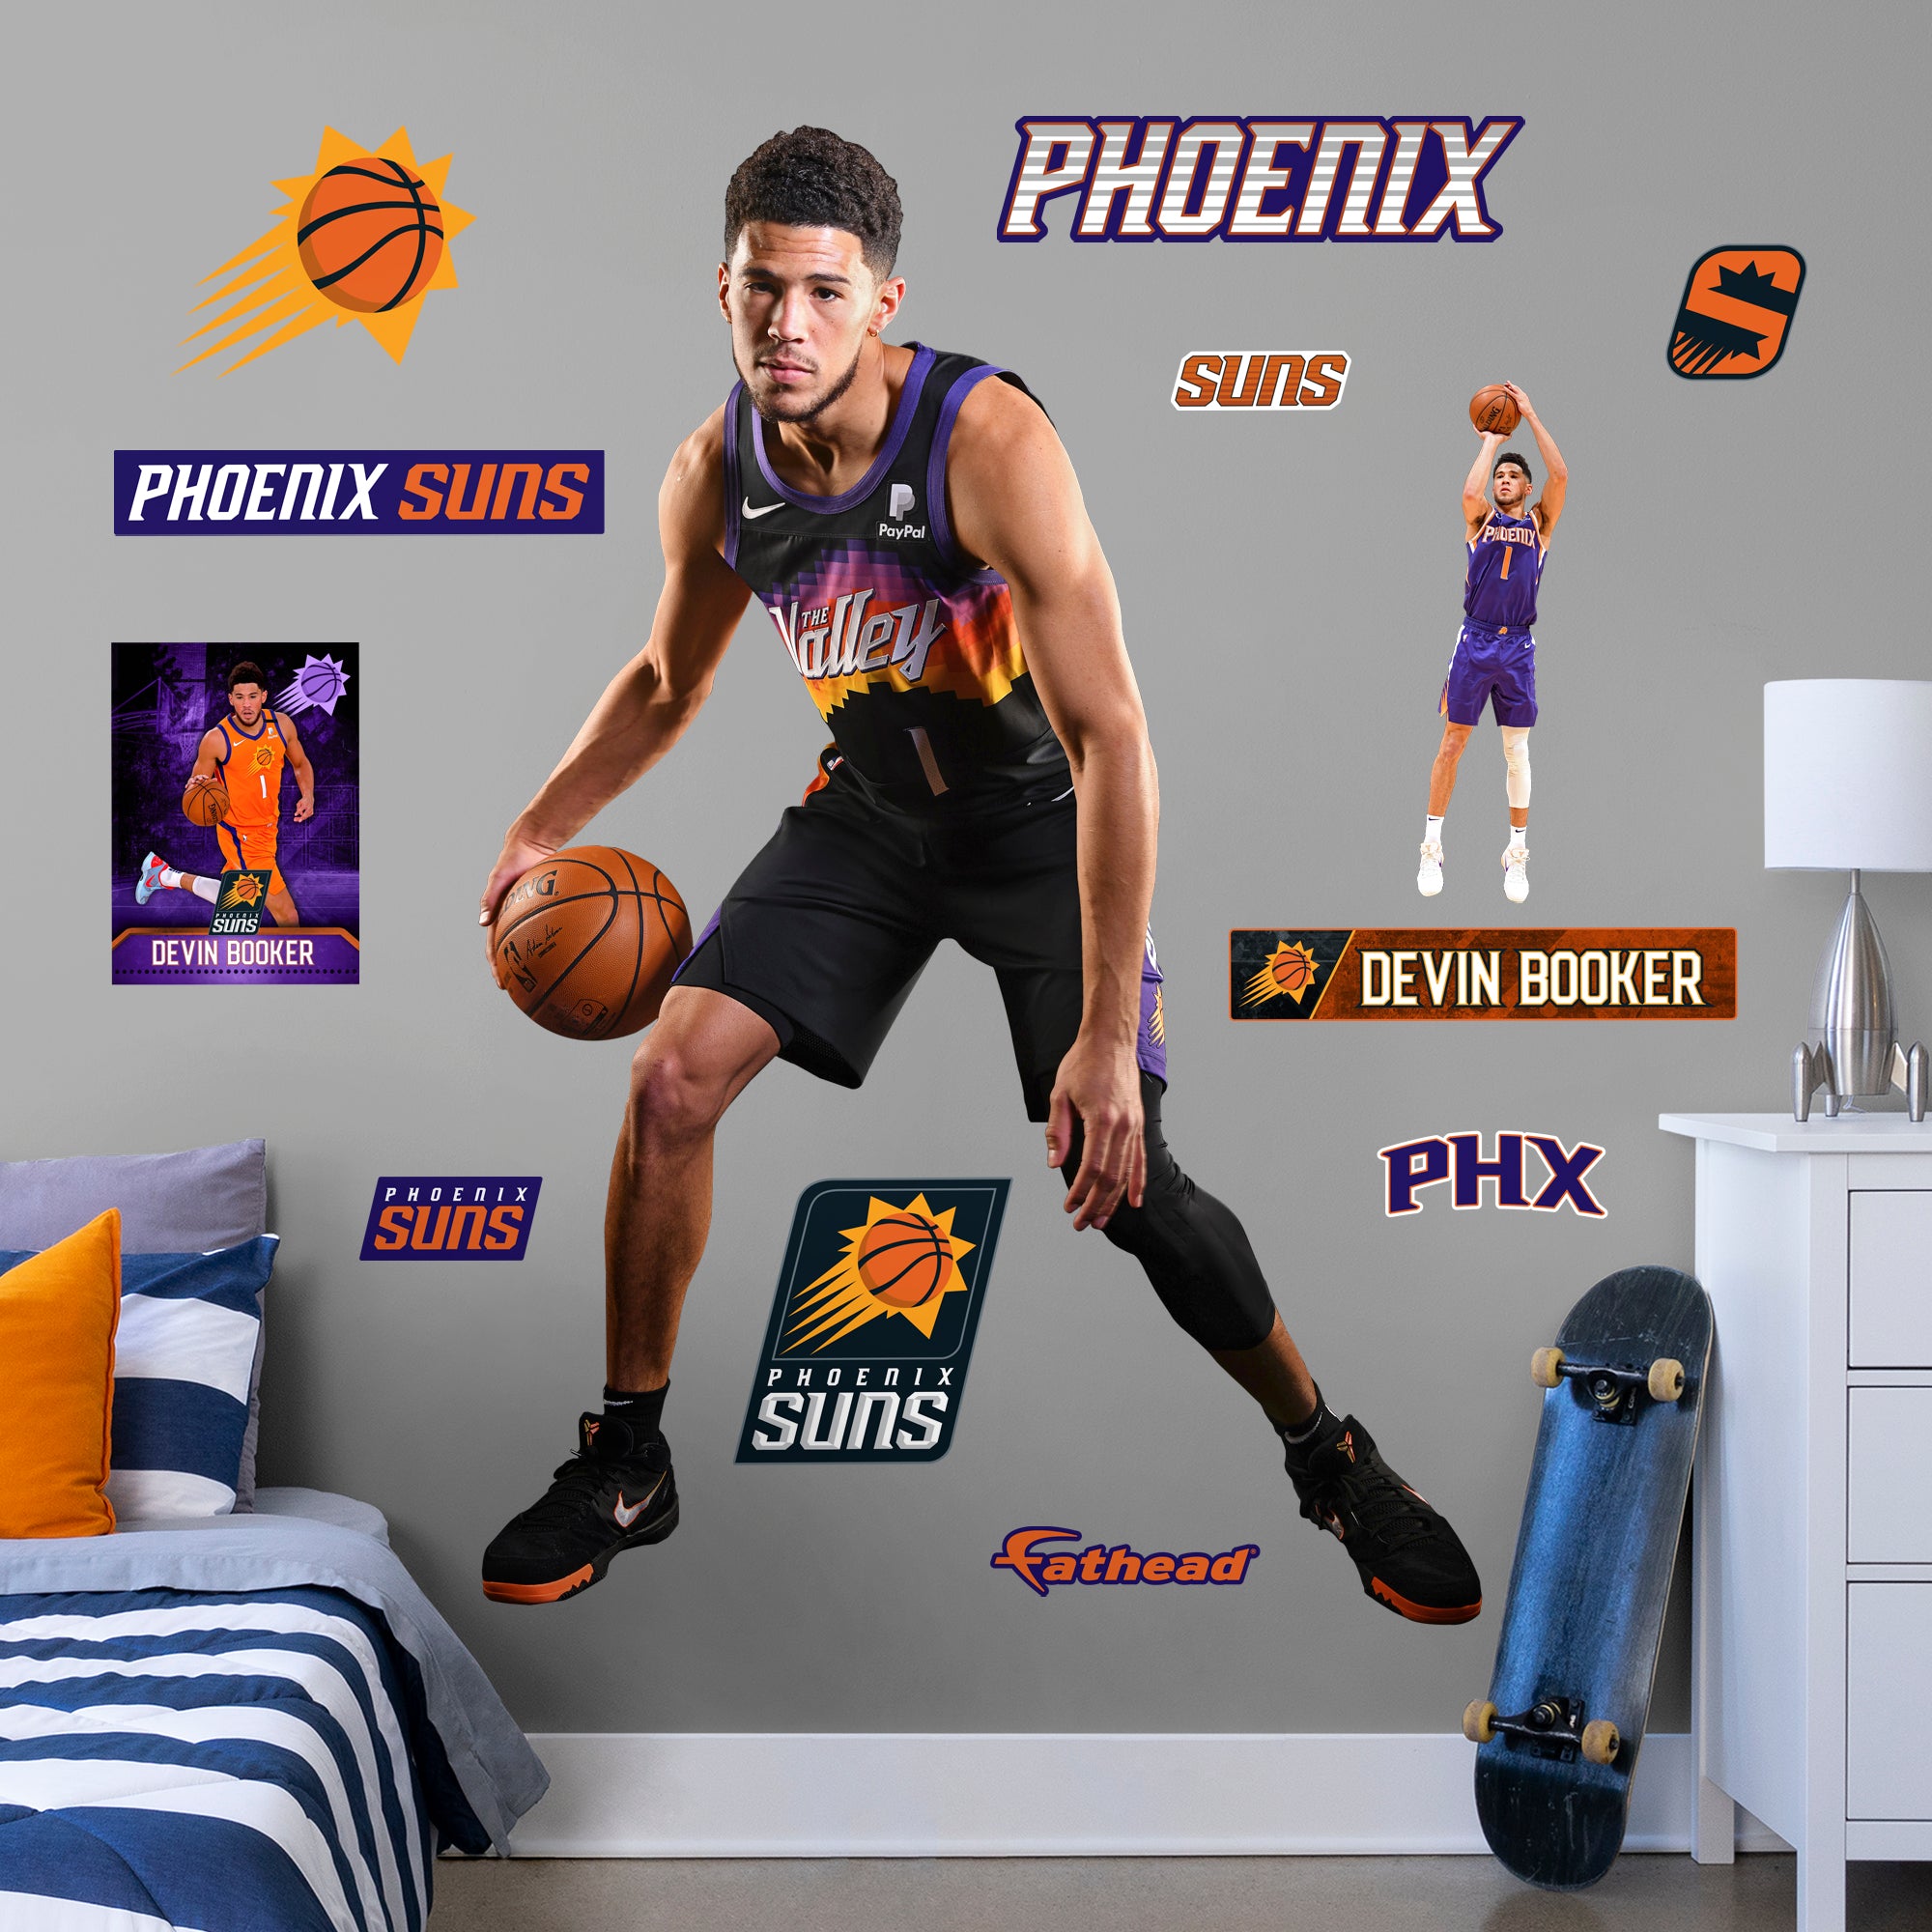 Devin Booker 2020 The Valley - Officially Licensed NBA Removable Wall Decal Life-Size Athlete + 11 Decals (50.5"W x 76"H) by Fat